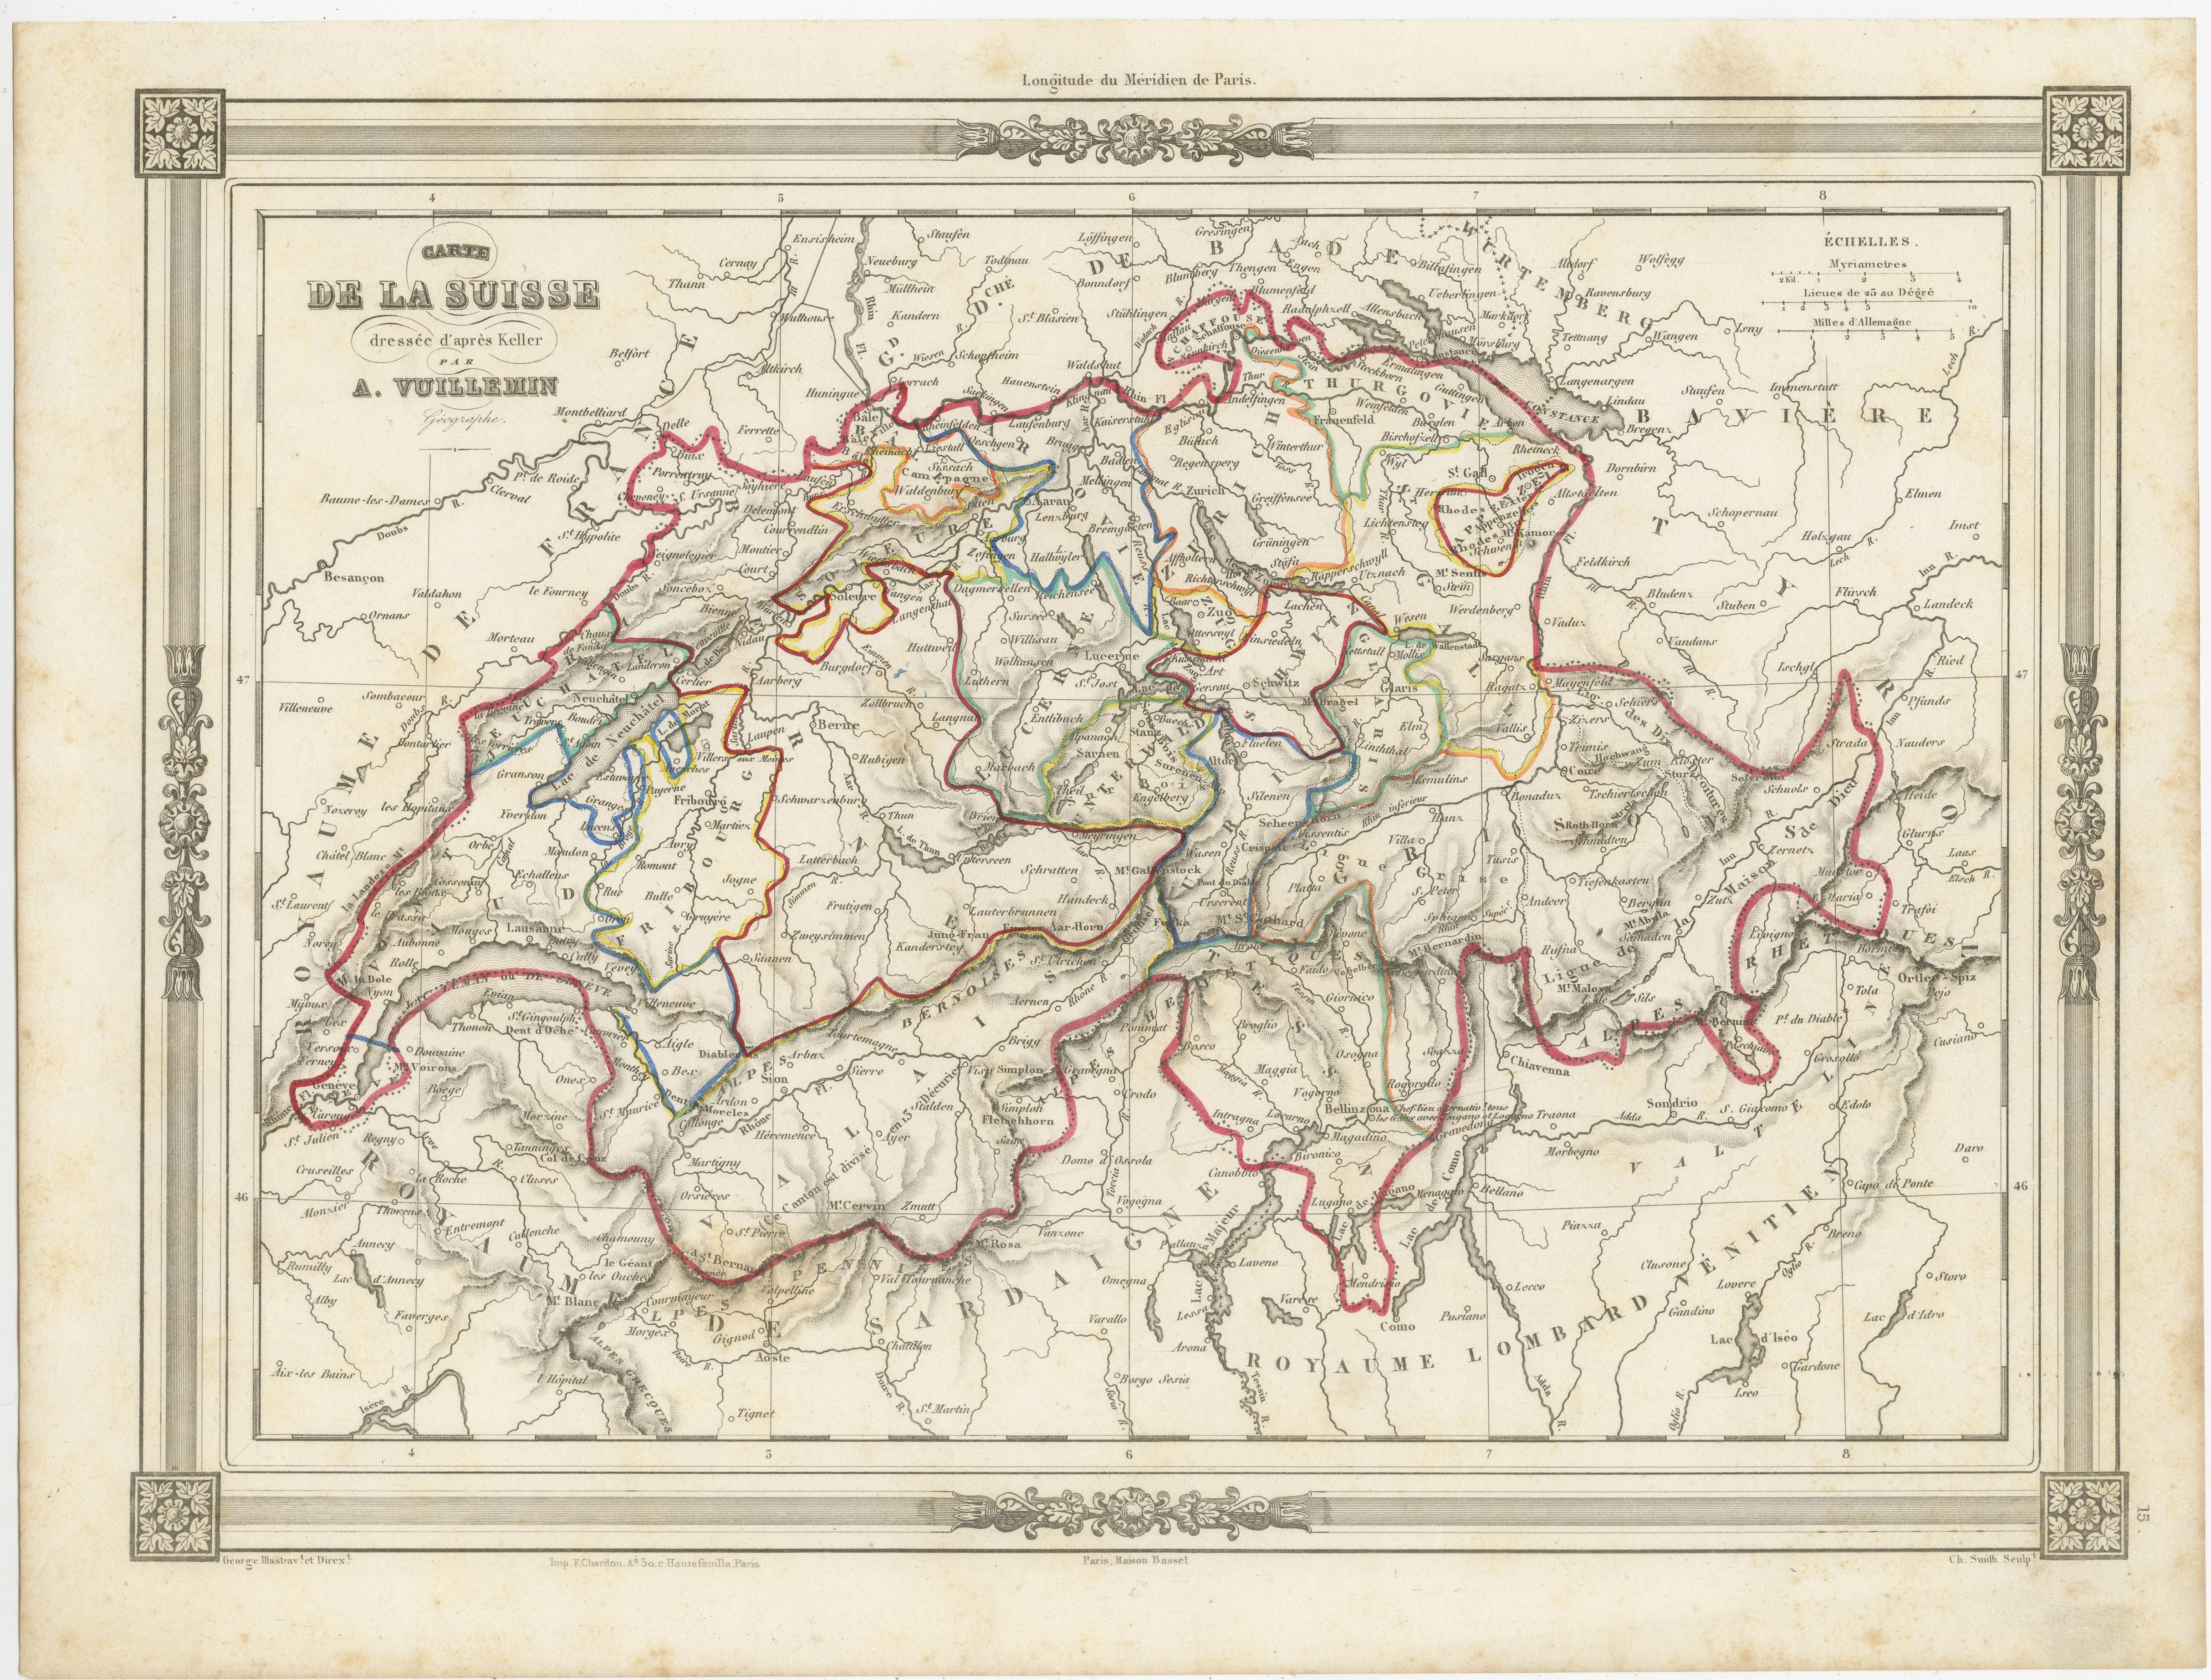 The antique map titled 'Carte de la Suisse' is an attractive map of Switzerland. Here are the key details and features of the map:

1. **Geographic Coverage**:
   - The map provides comprehensive coverage of Switzerland, depicting the entire